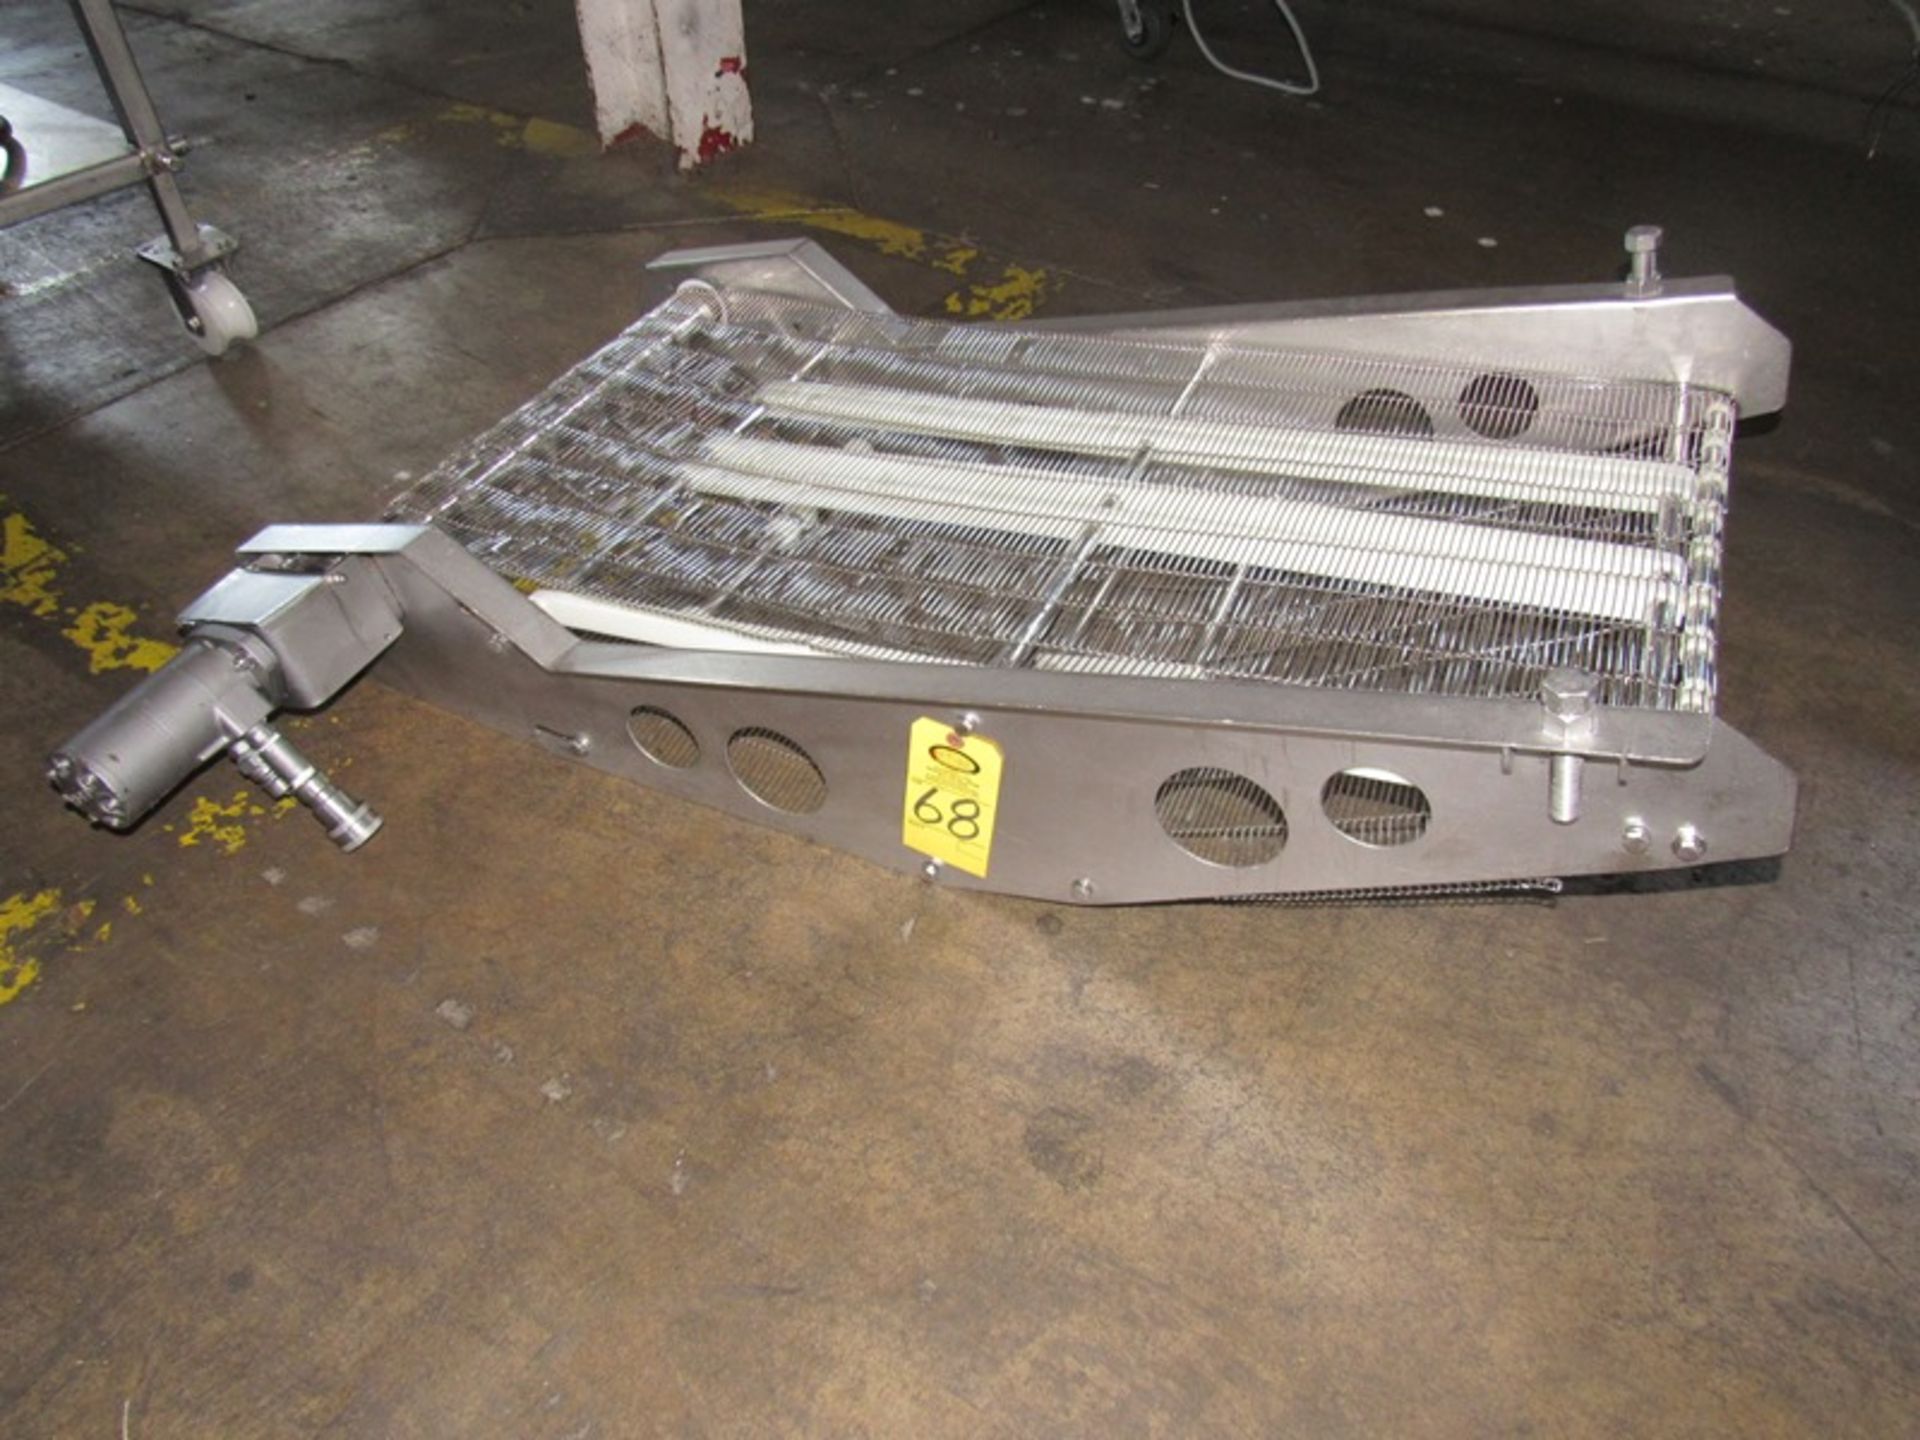 Stainless Steel Conveyor, 2' W X 4' L stainless steel ladder chain belt, hydraulic operation (